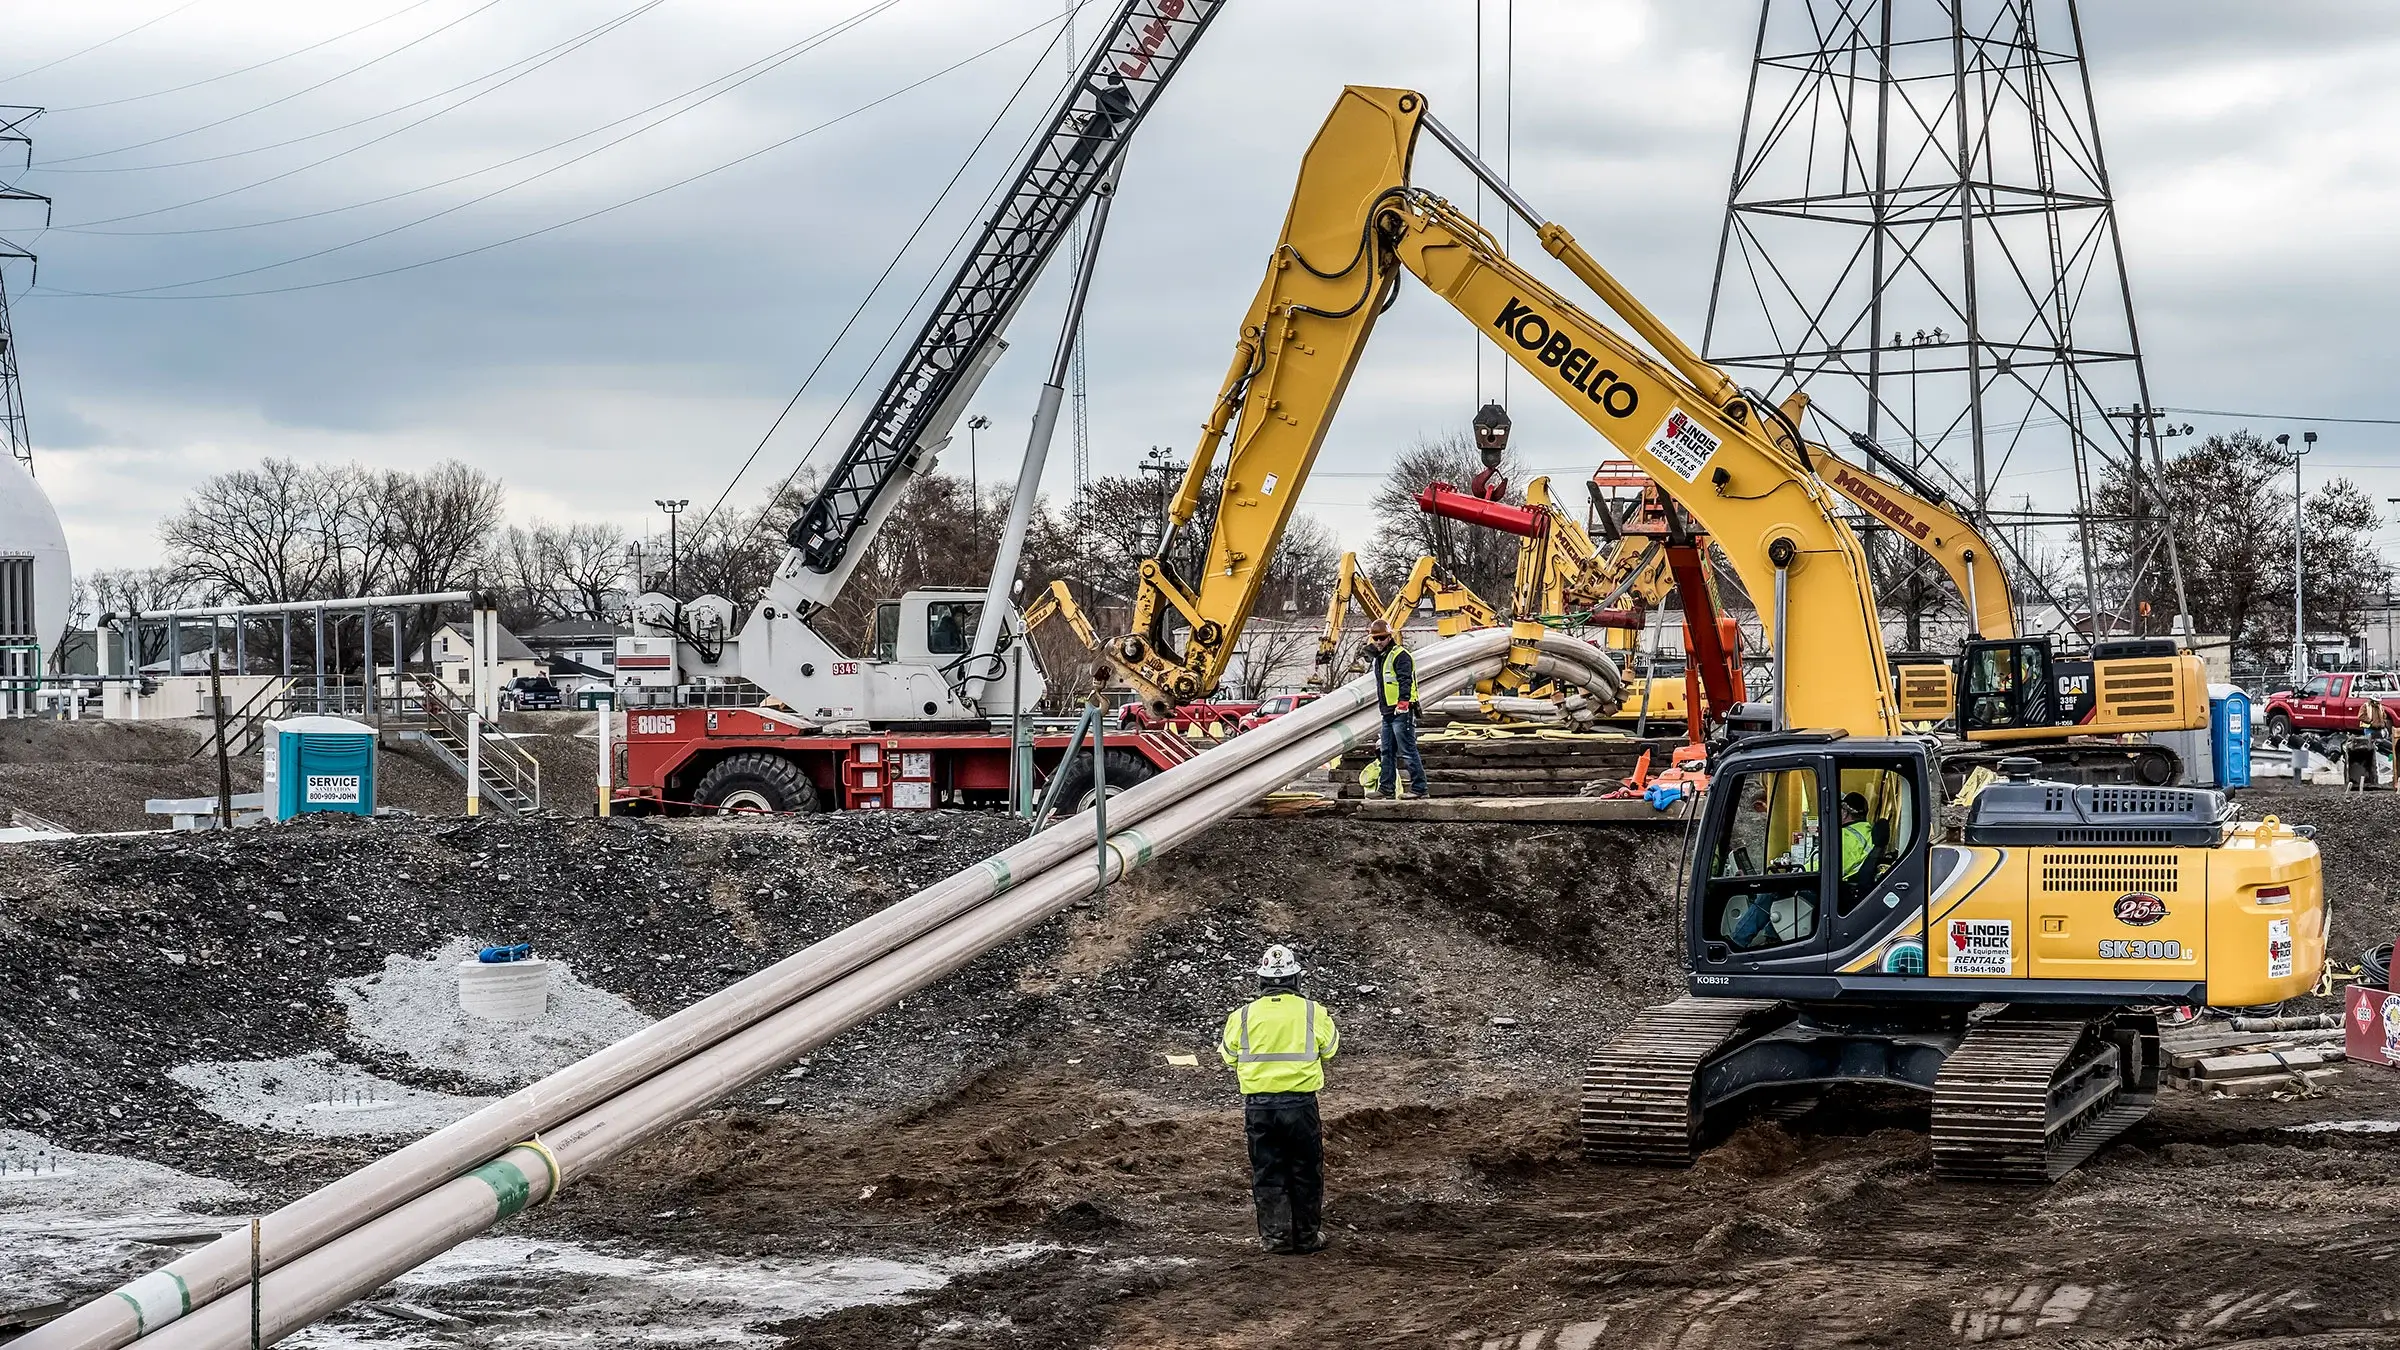 A bundle of pipes being lifted by multiple excavators